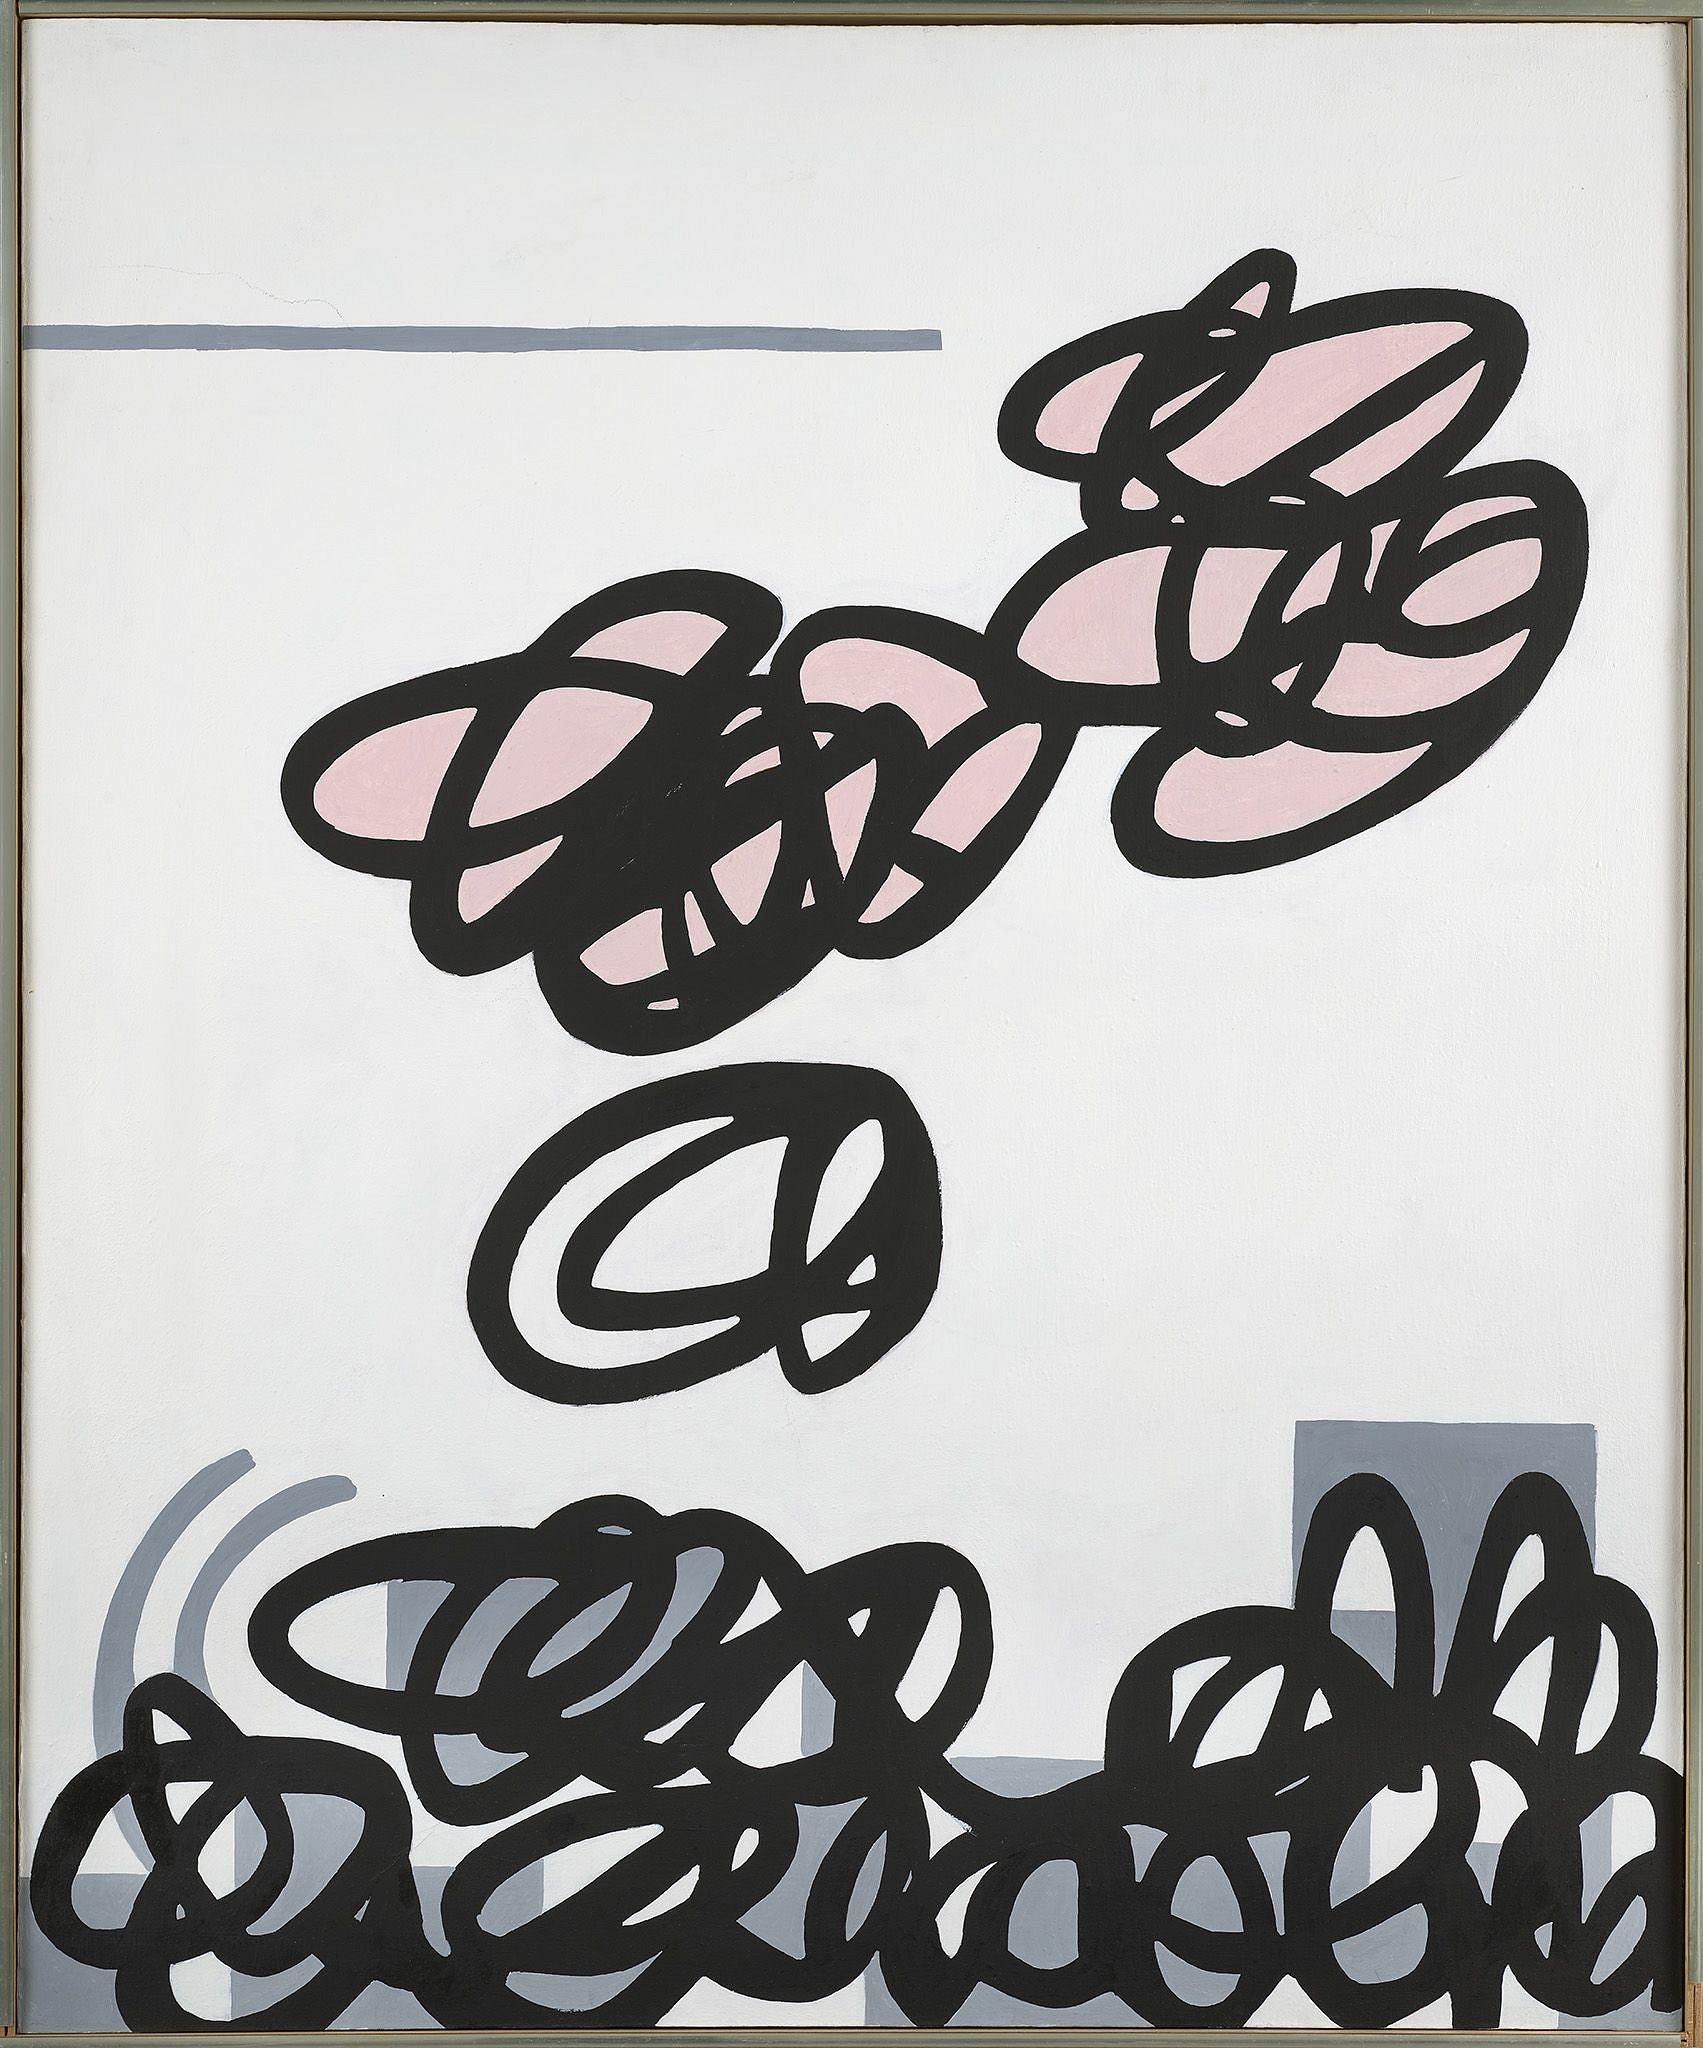 Info: Raymond Hendler | Paintings from the 1970s, Mar 17 - Apr 16, 2016